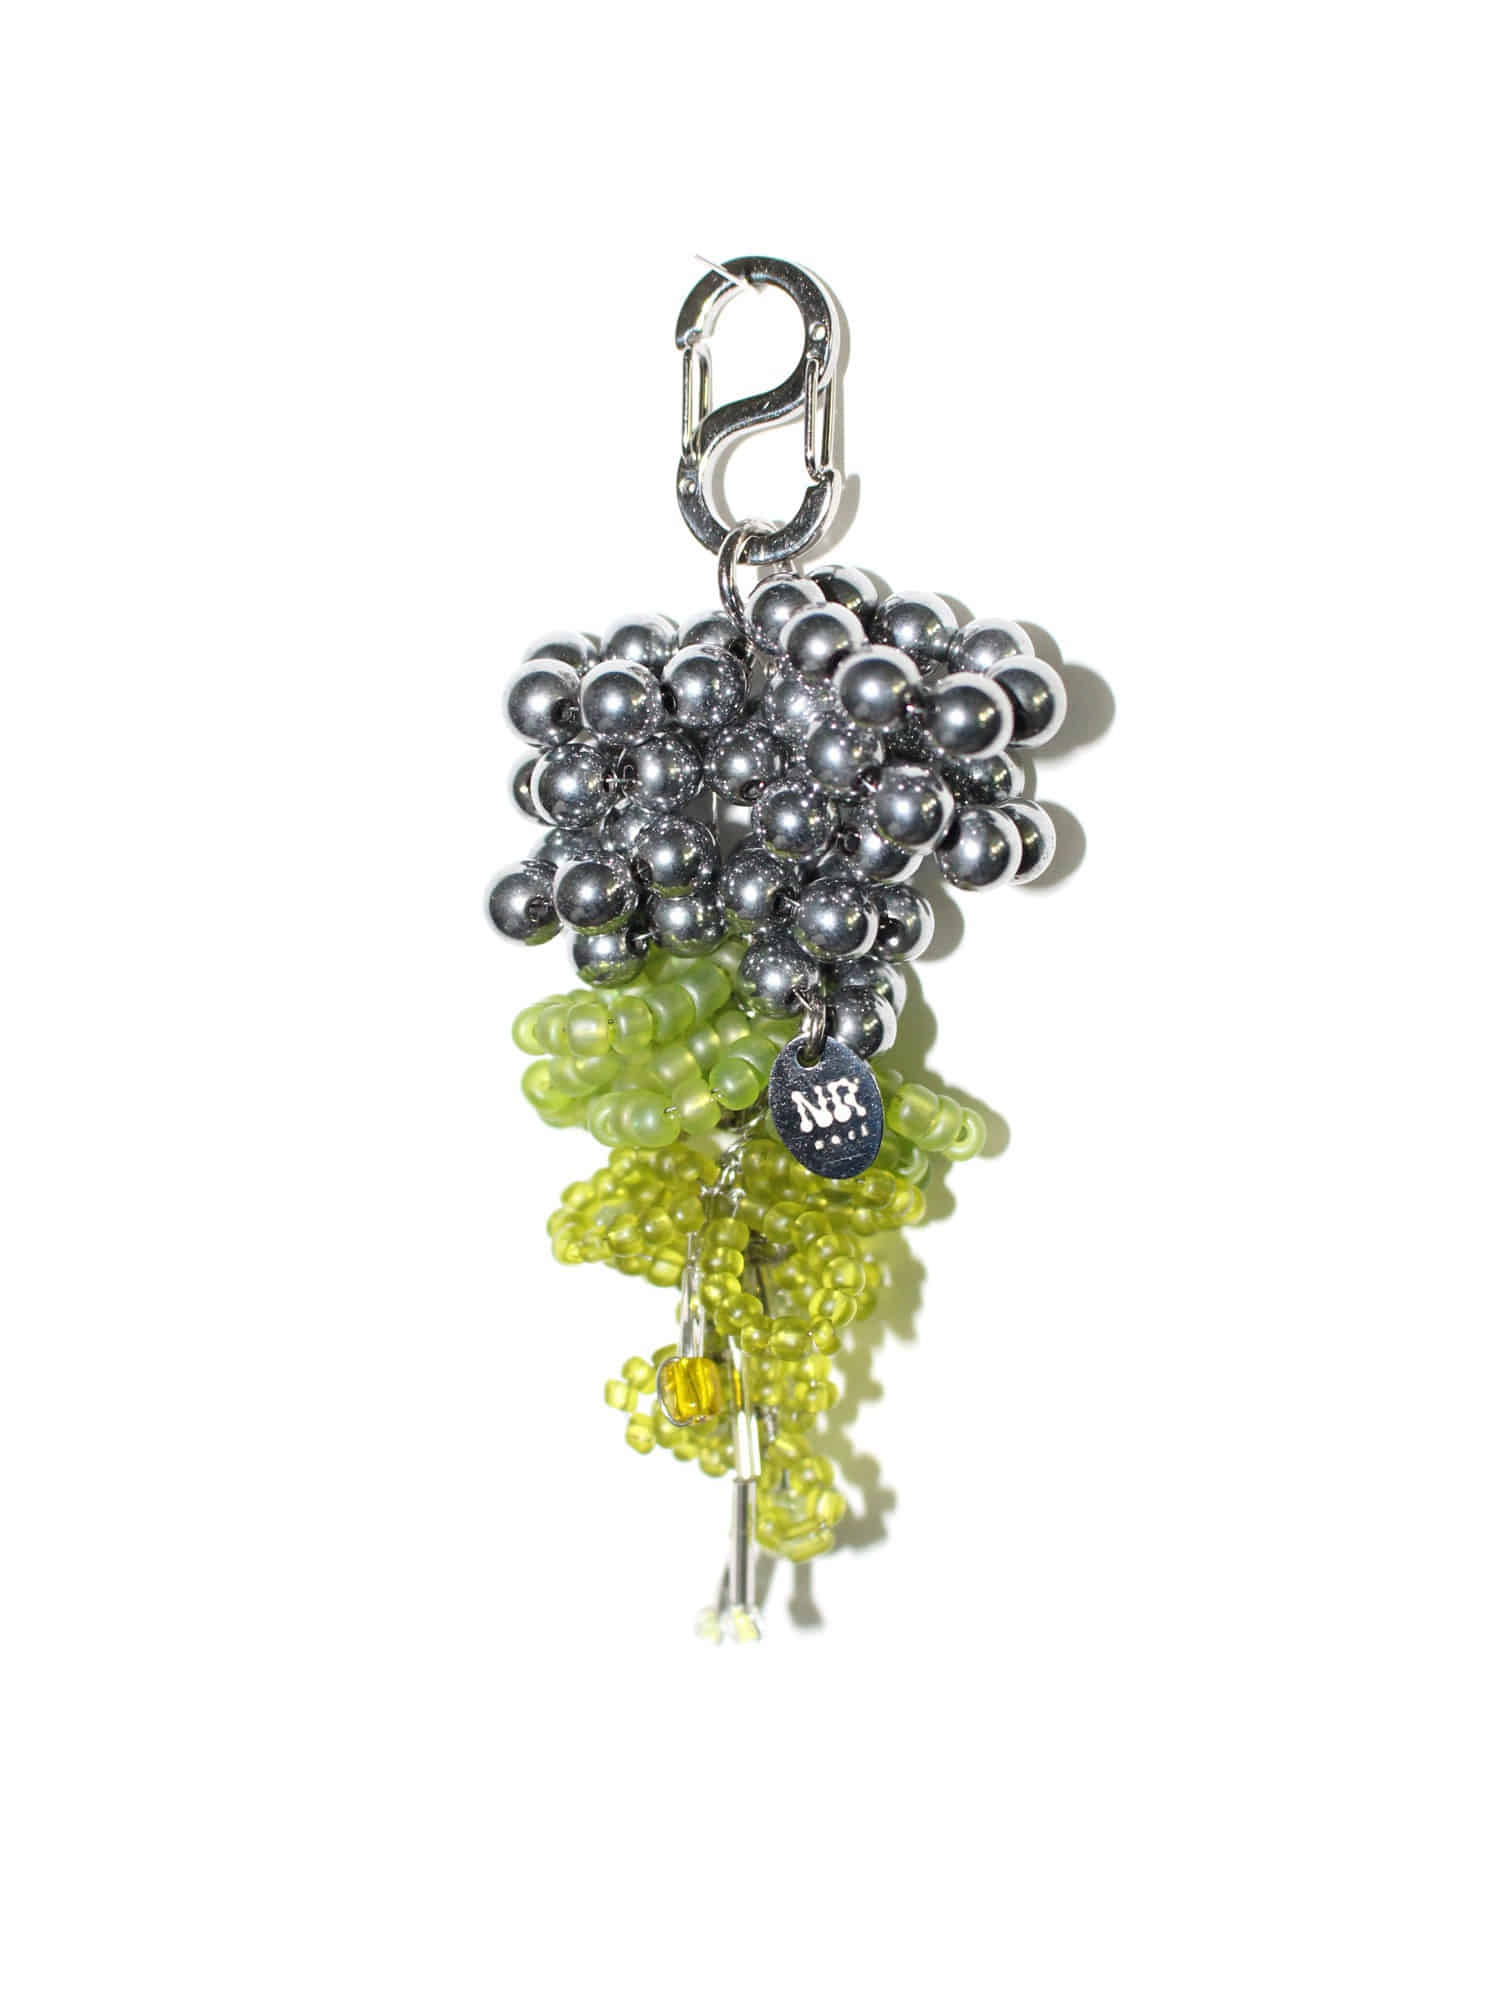 [COUTURE] Lyrical moment keyring _green